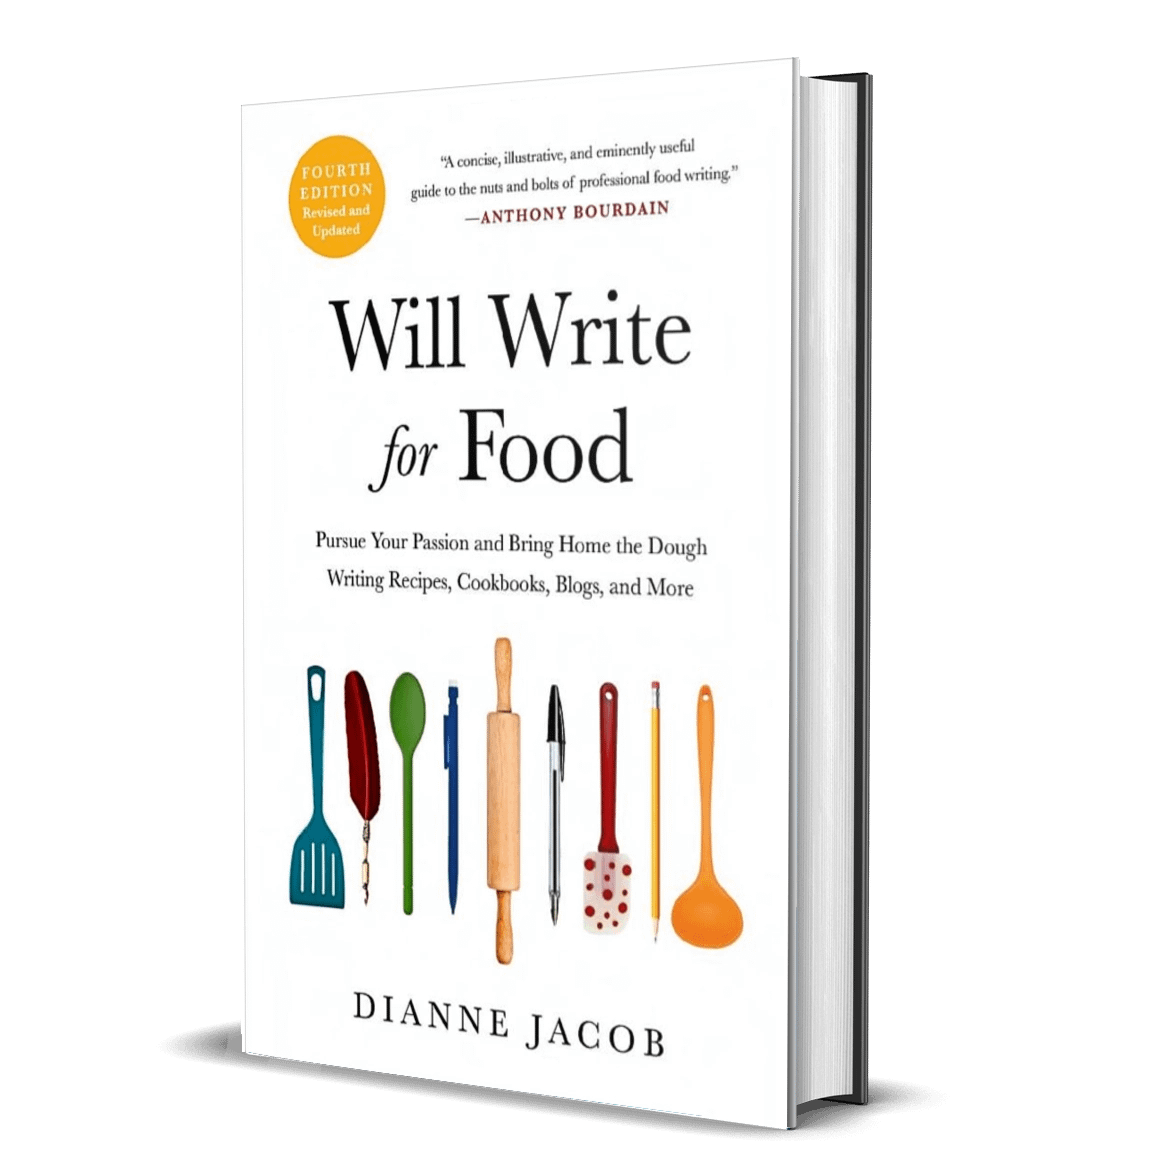 Will Write for Food by Dianne Jacob is an excellent book for anyone looking to start their own food blog.